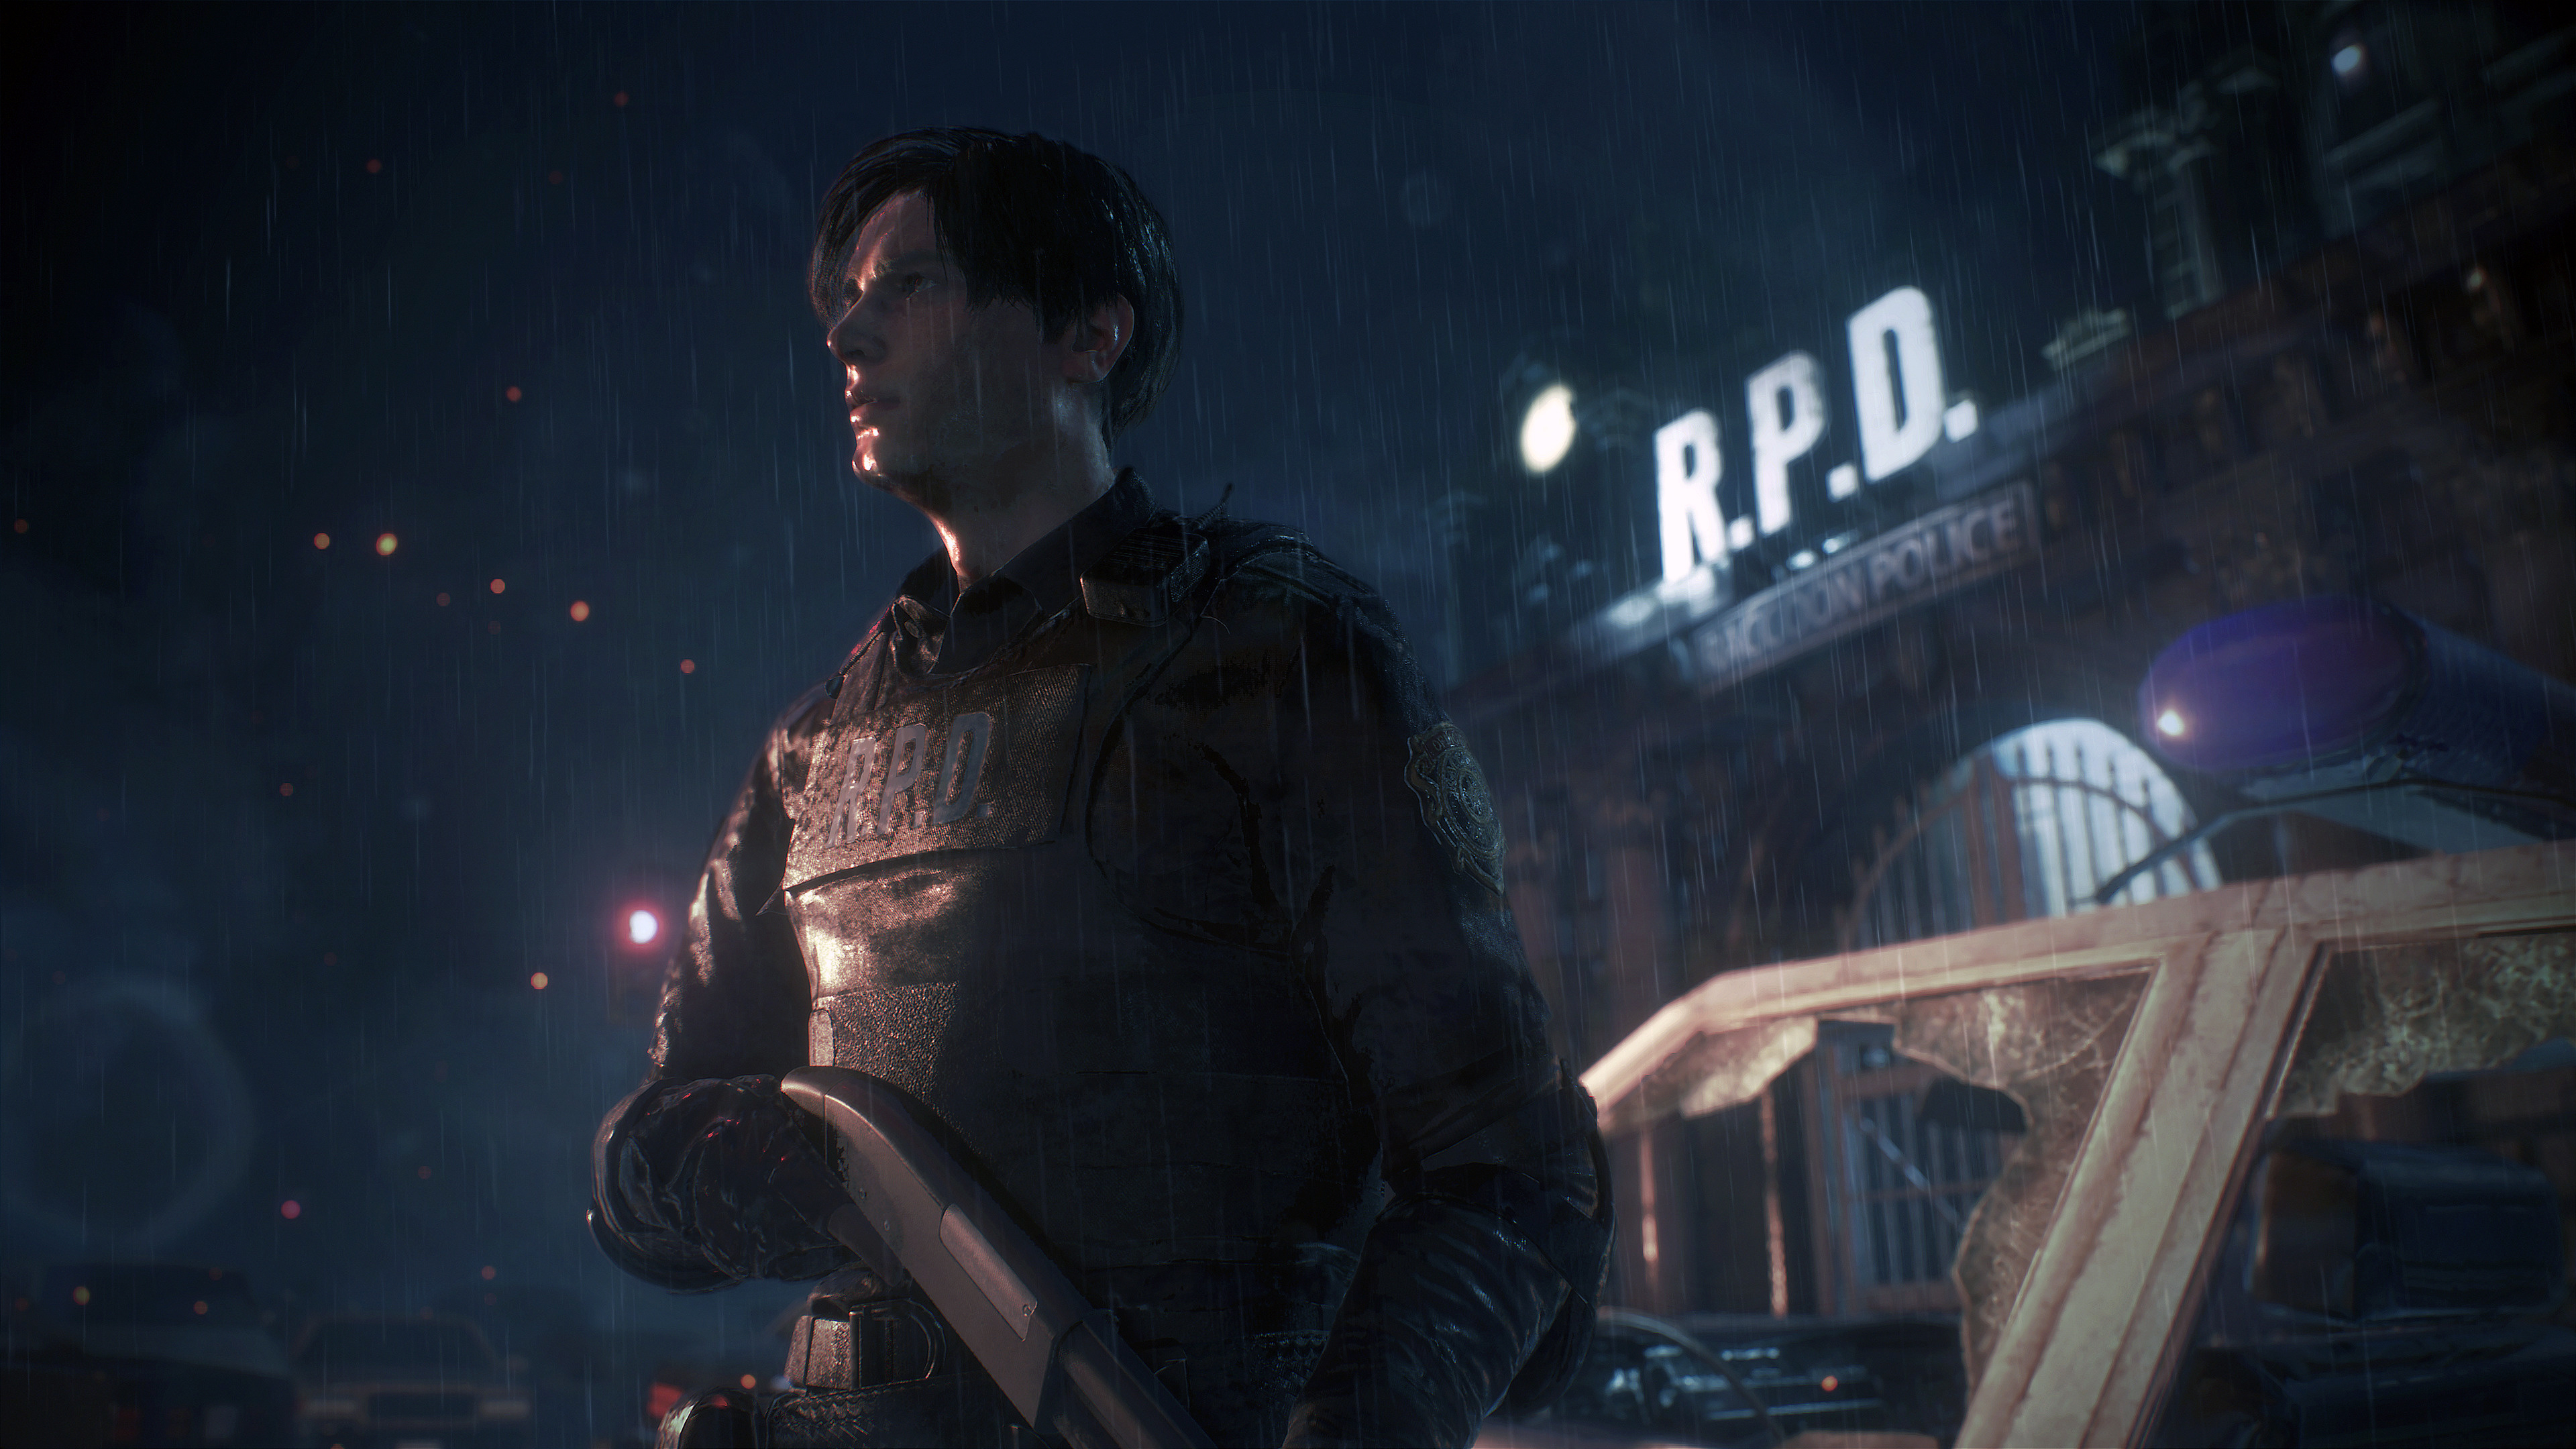 3840x2160 Wallpaper : Resident Evil 2, video games, Claire Redfield, Leon Kennedy, Capcom, Racoon City MeaningJun 1444695 HD Wallpapers